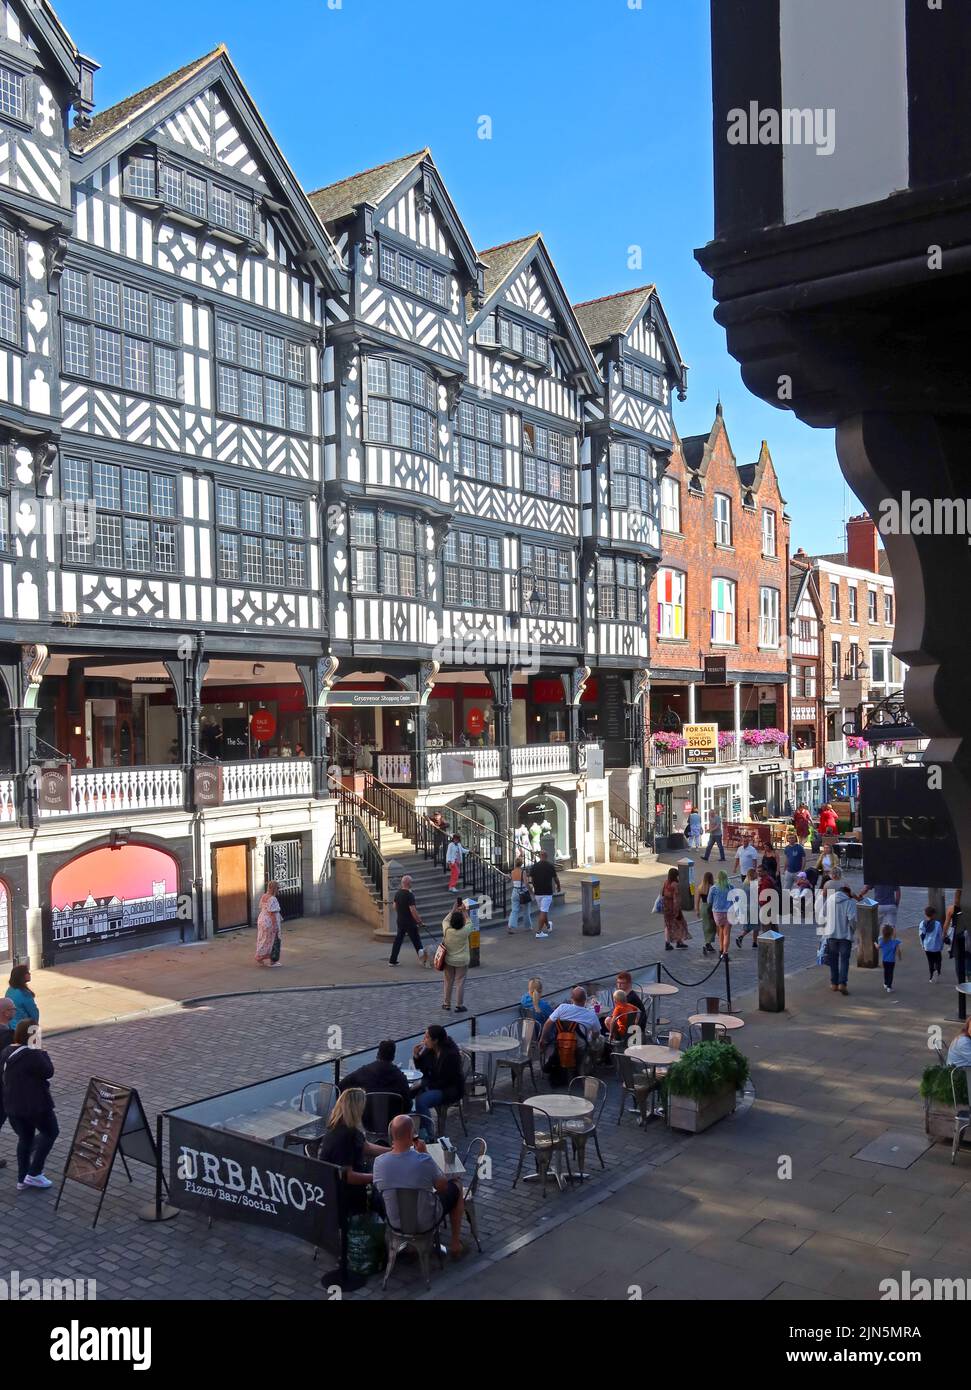 Main entrance showing Rows, Grosvenor shopping centre mall, Bridge Street, Chester, Cheshire, England, UK, CH1 1NW Stock Photo